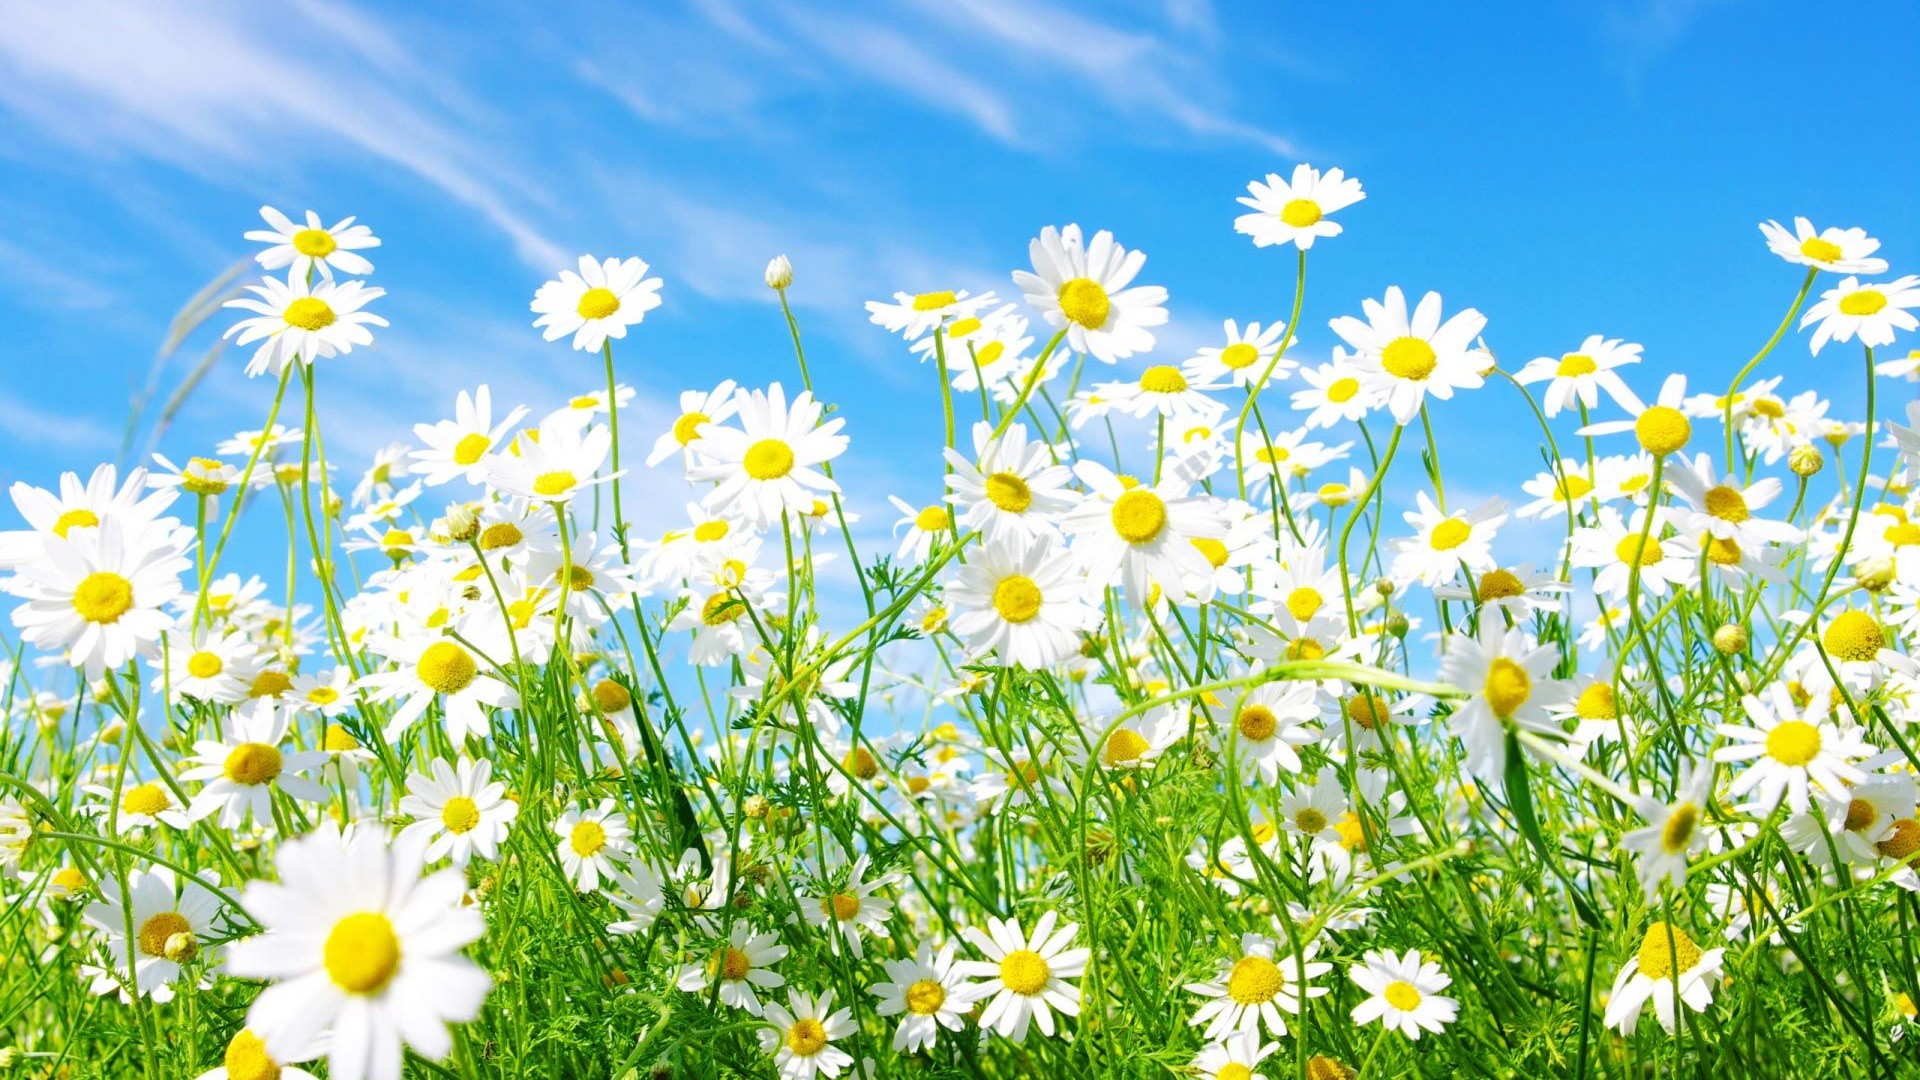 HD Spring Flowers Backgrounds Resolution 1920x1080